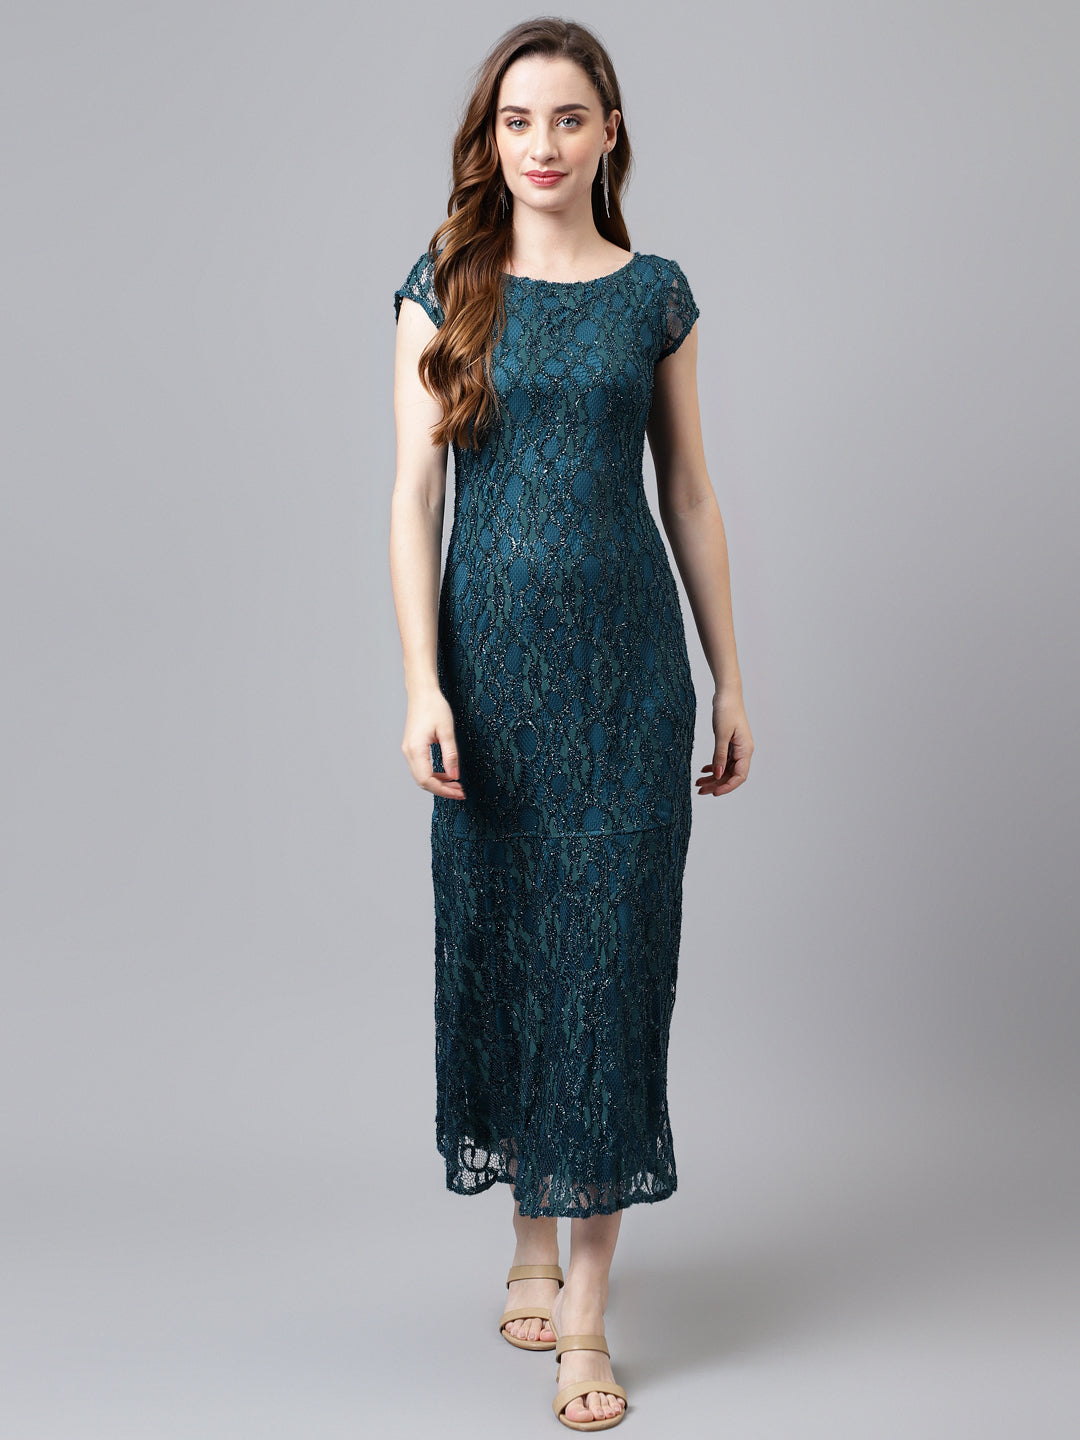 Greenforst Cap Sleeve Round Neck Solid Women Maxi Dress For Party